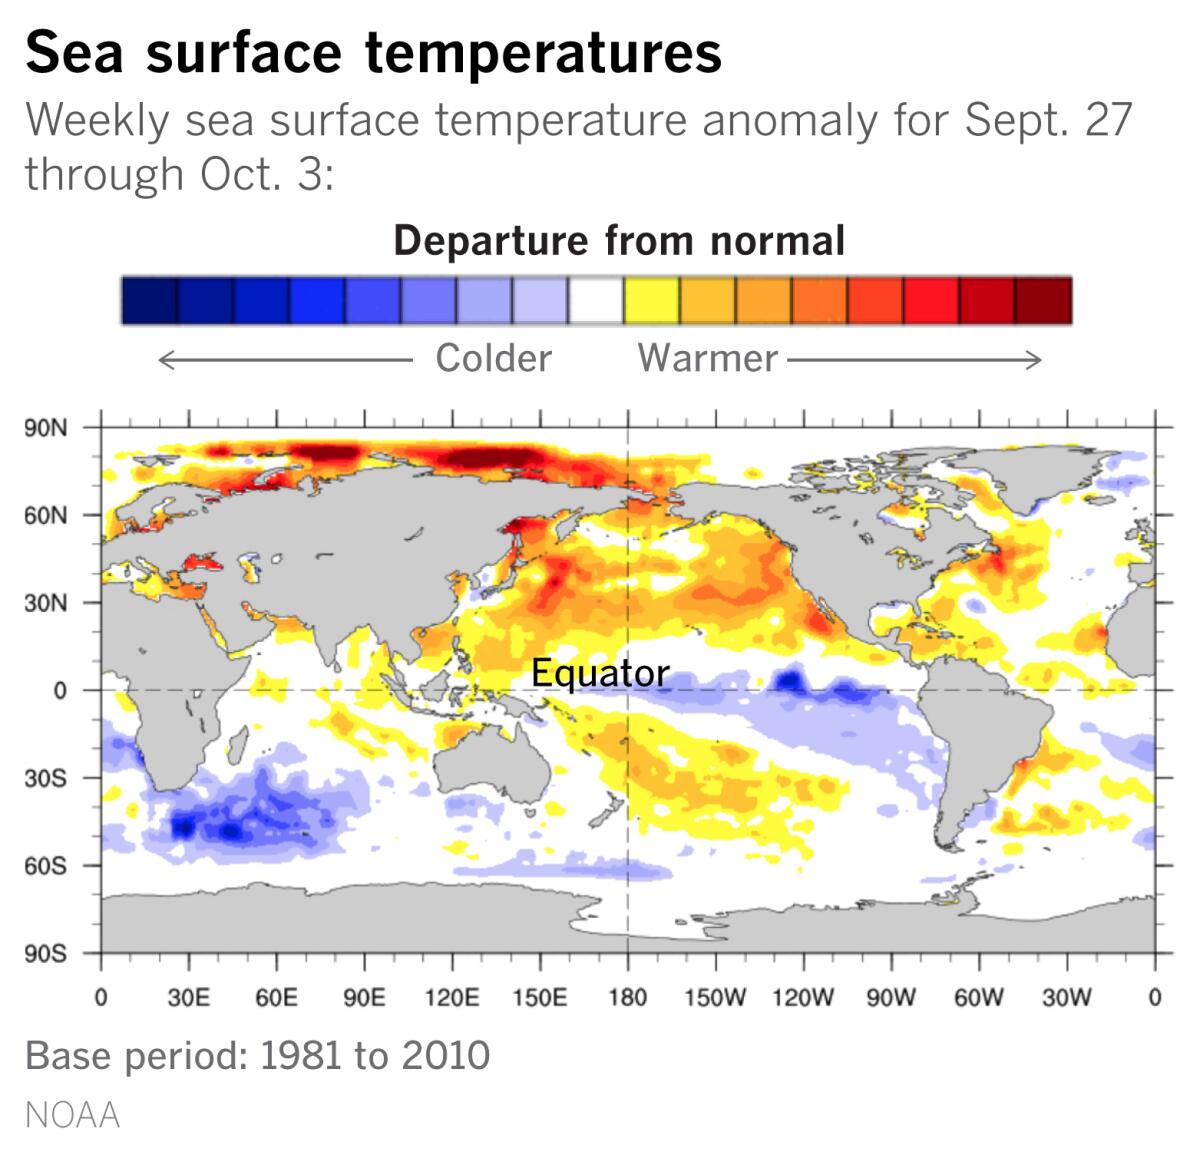 Sea surface temperatures show a strengthening La Ni?a.